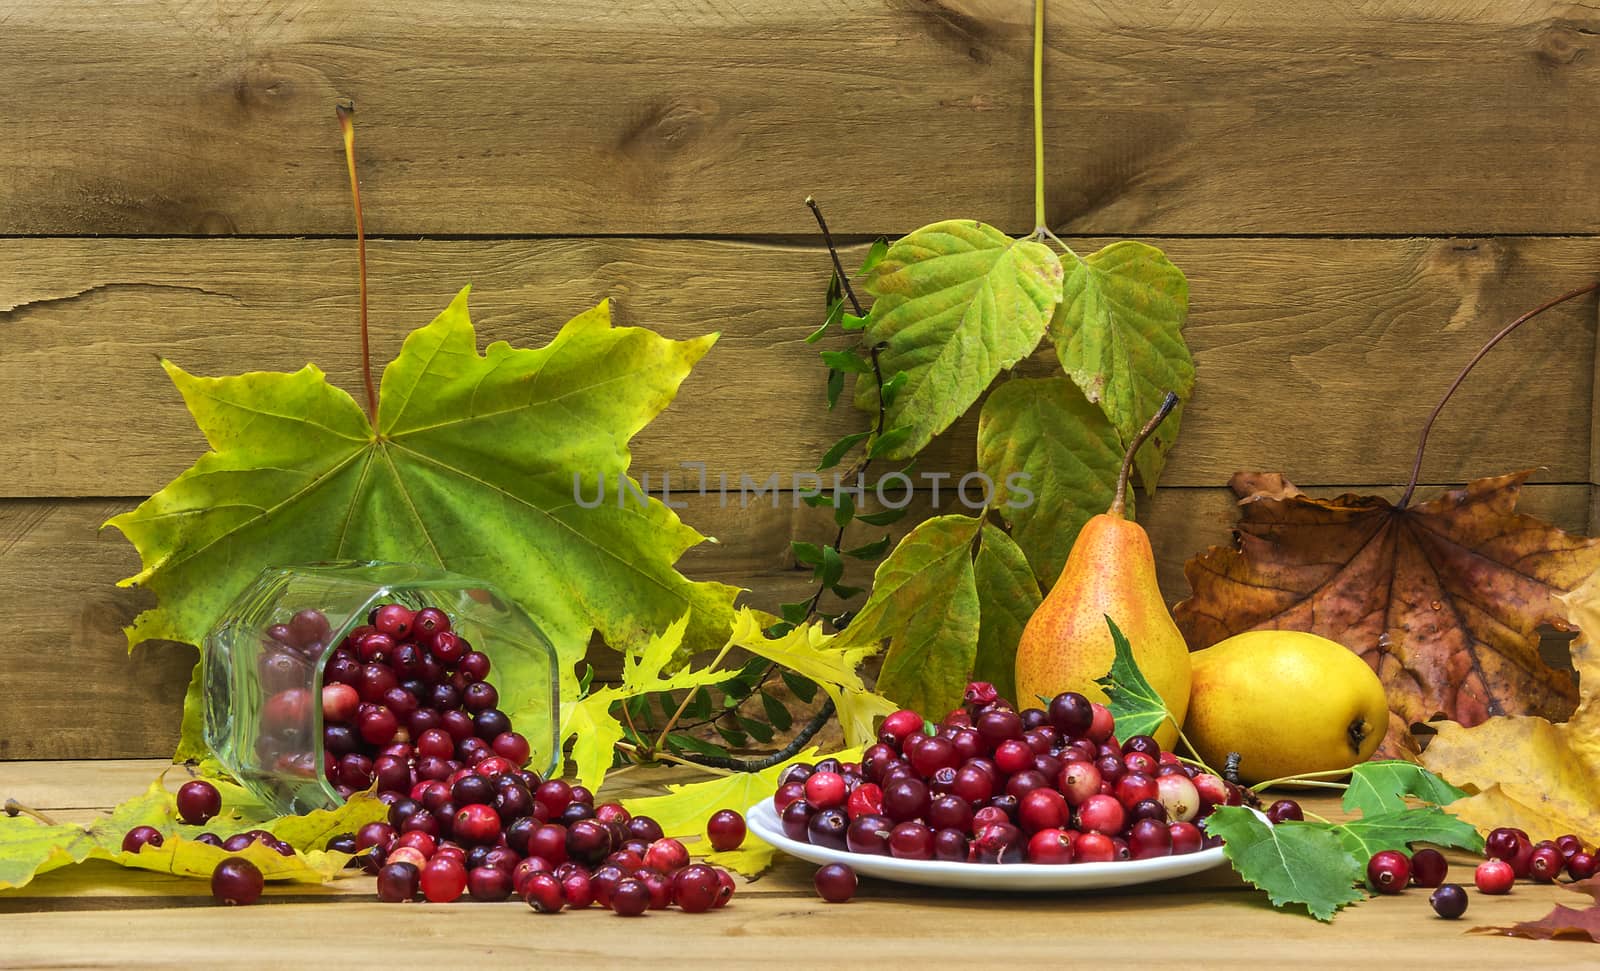 Against the background of a wooden surface surrounded by yellow autumn leaves lie pears and cranberries in a glass and fallen white saucer